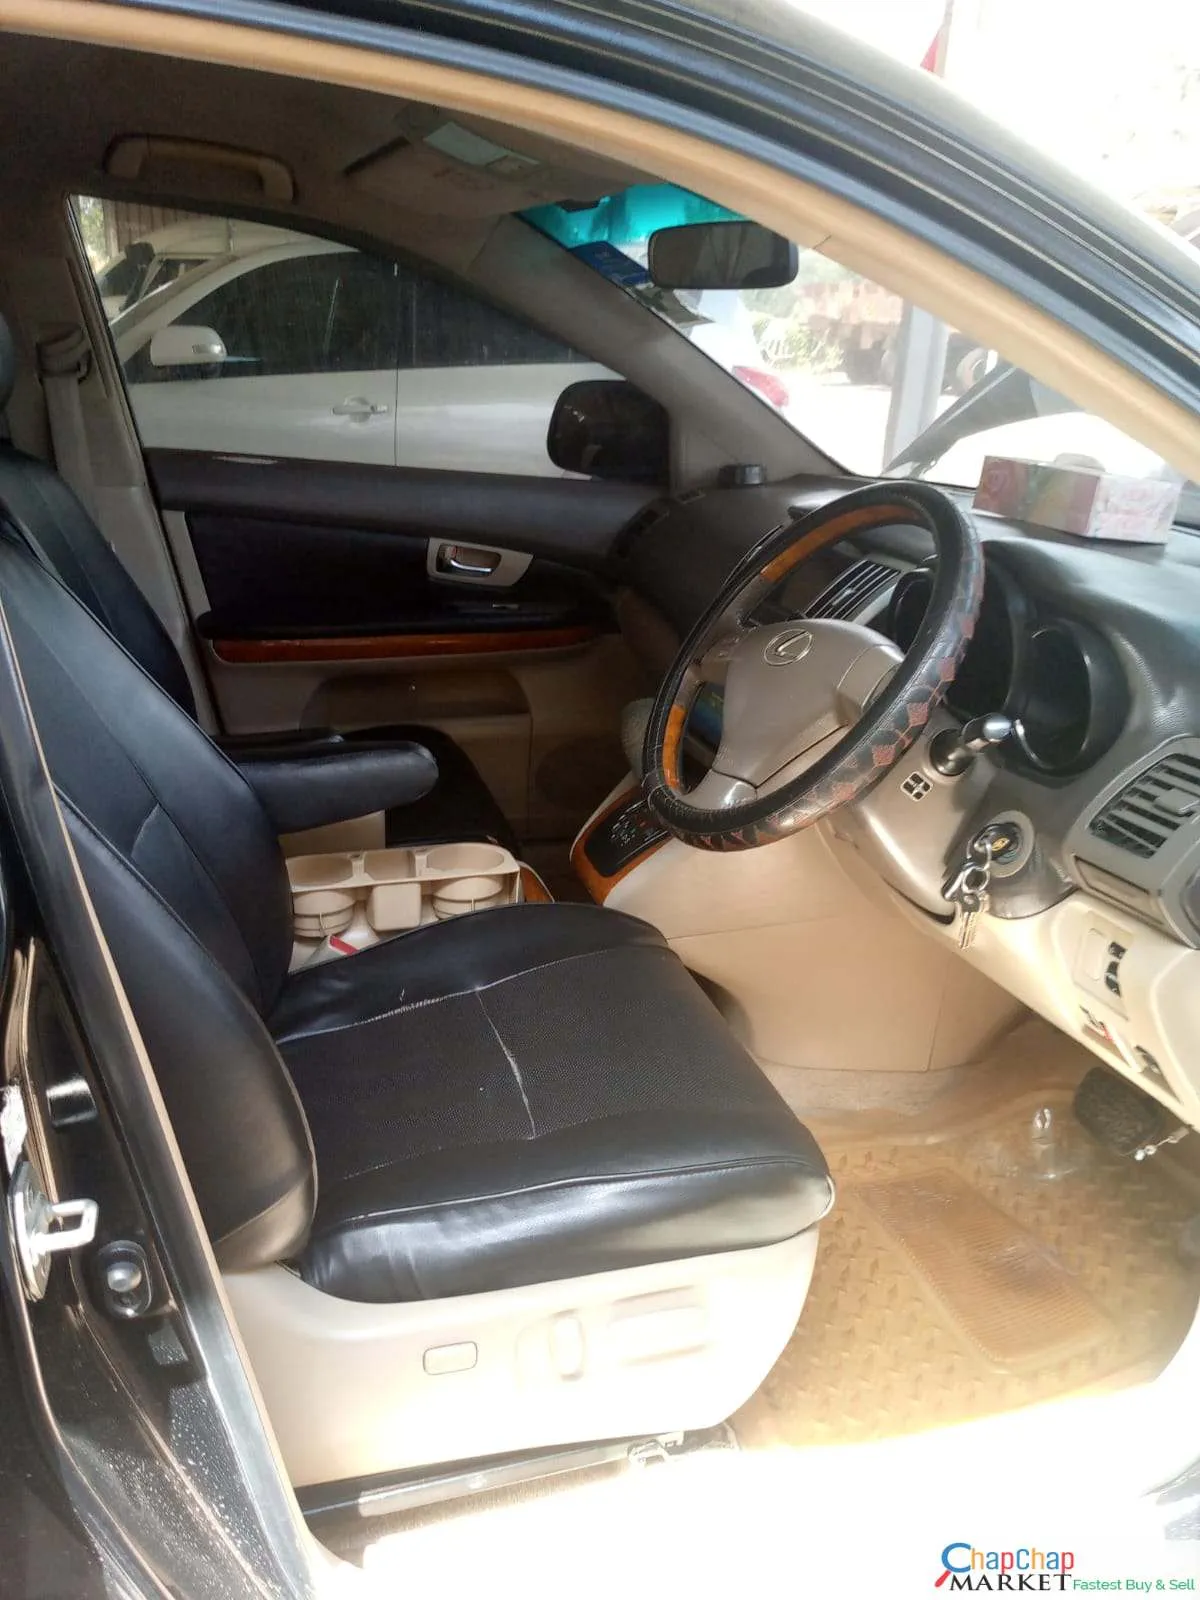 Toyota Harrier kenya QUICK SALE You Pay 30% Deposit Trade in OK harrier for sale in kenya hire purchase installments EXCLUSIVE (SOLD)